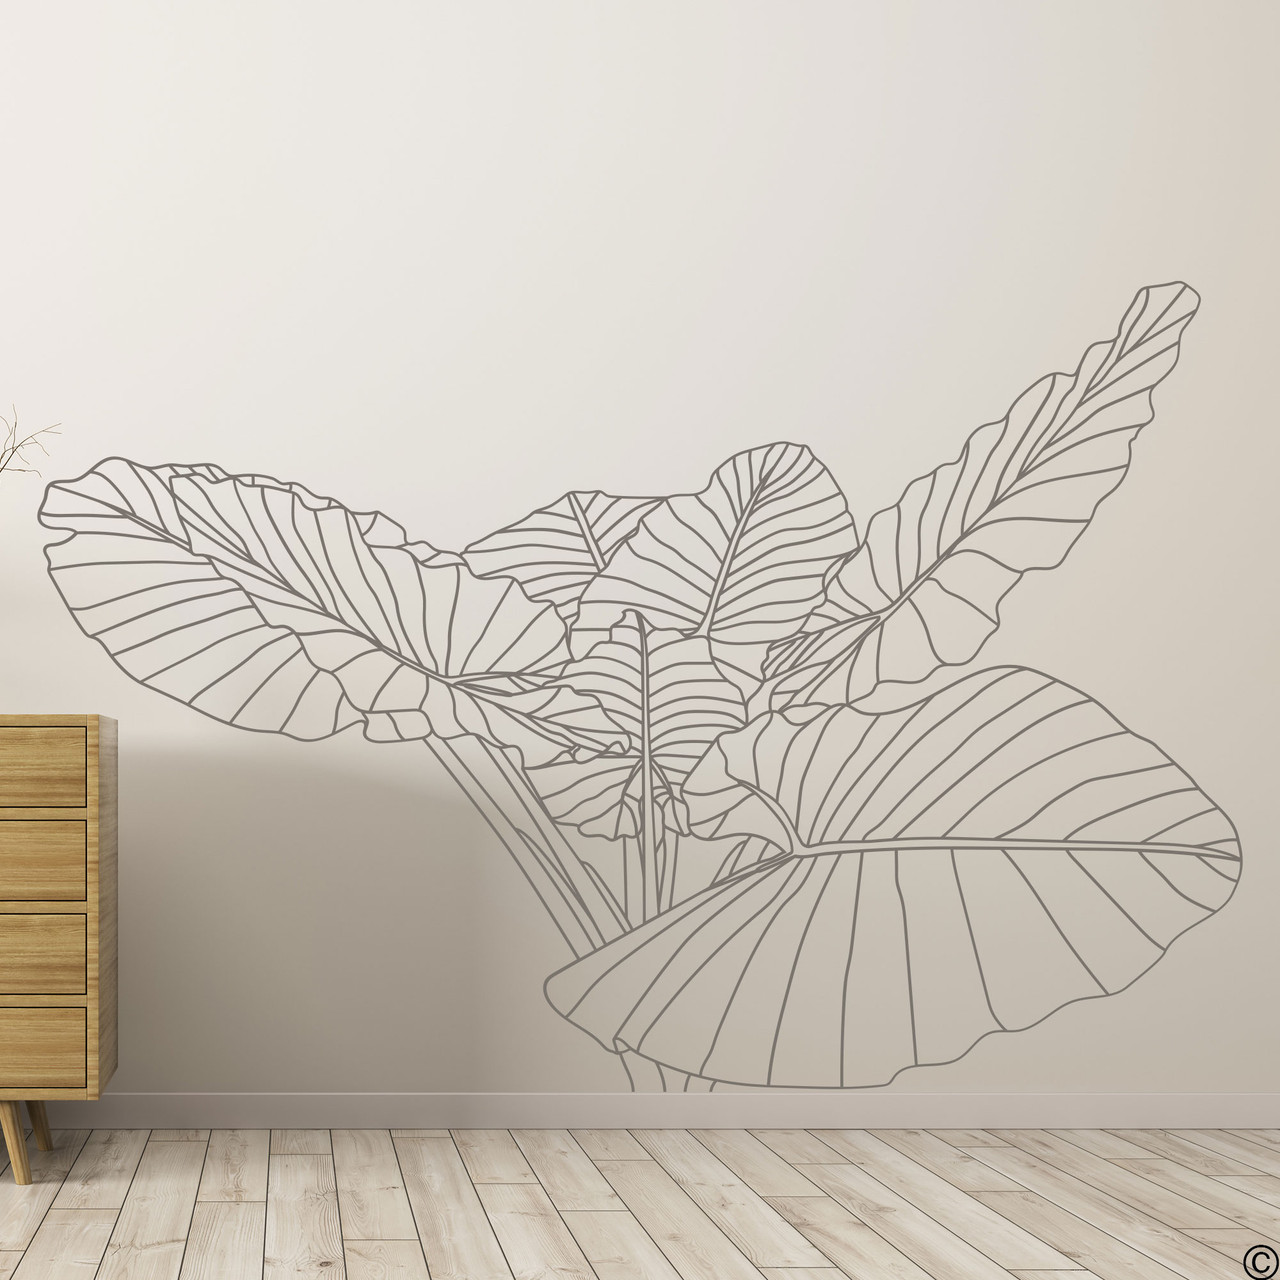 The Elephant Ear no.2 tropical plant wall decal, wire frame drawing in limited edition castle grey vinyl.